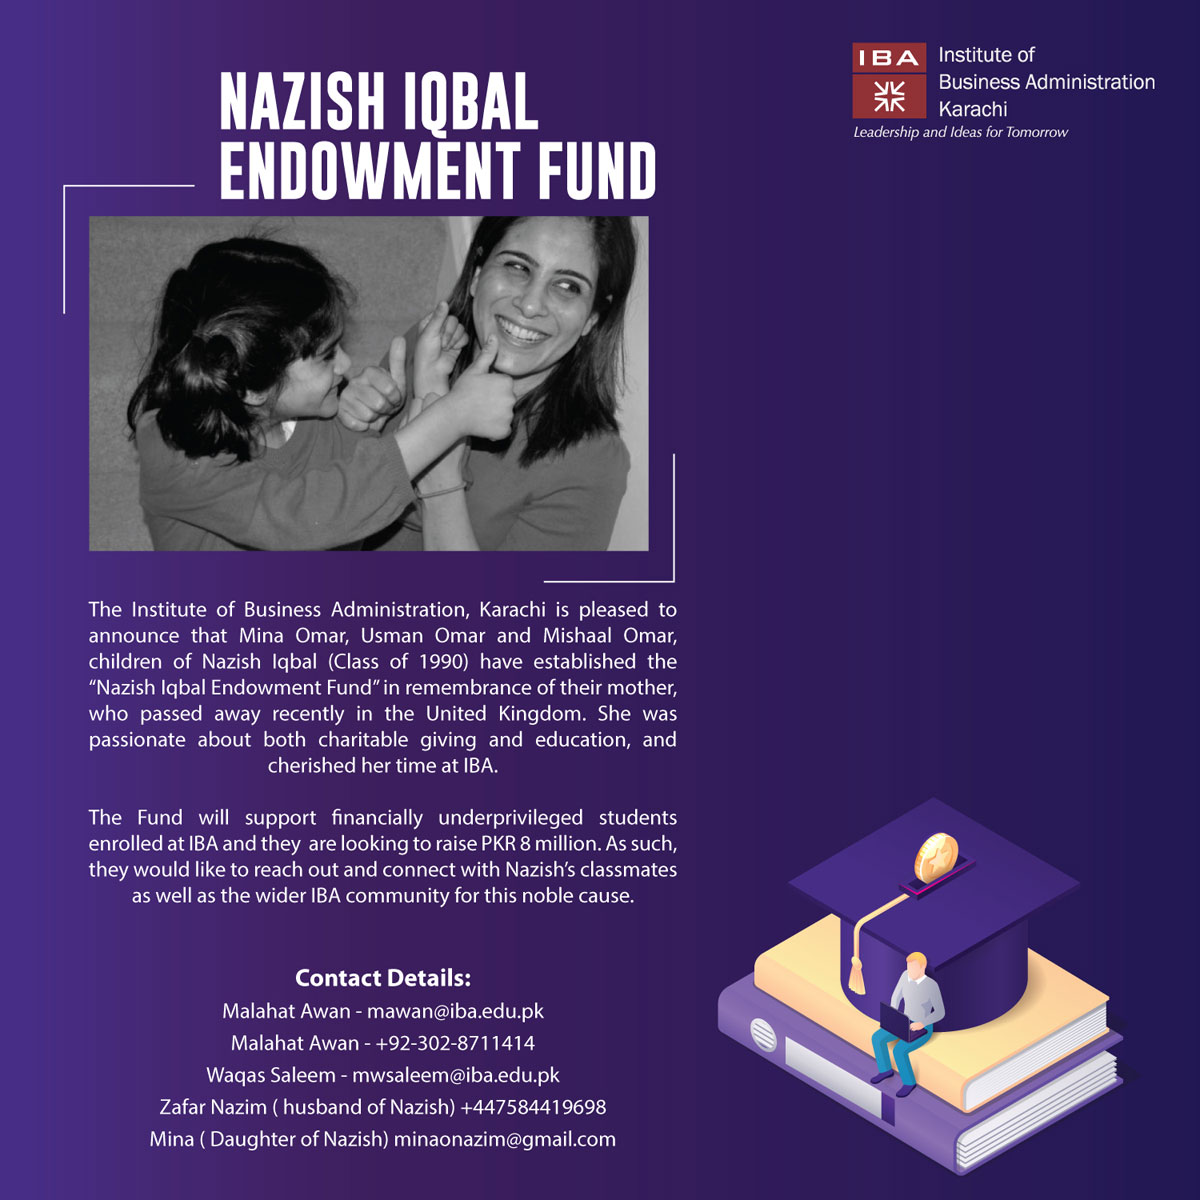 'Nazish Iqbal Endowment Fund' set up to support deserving students